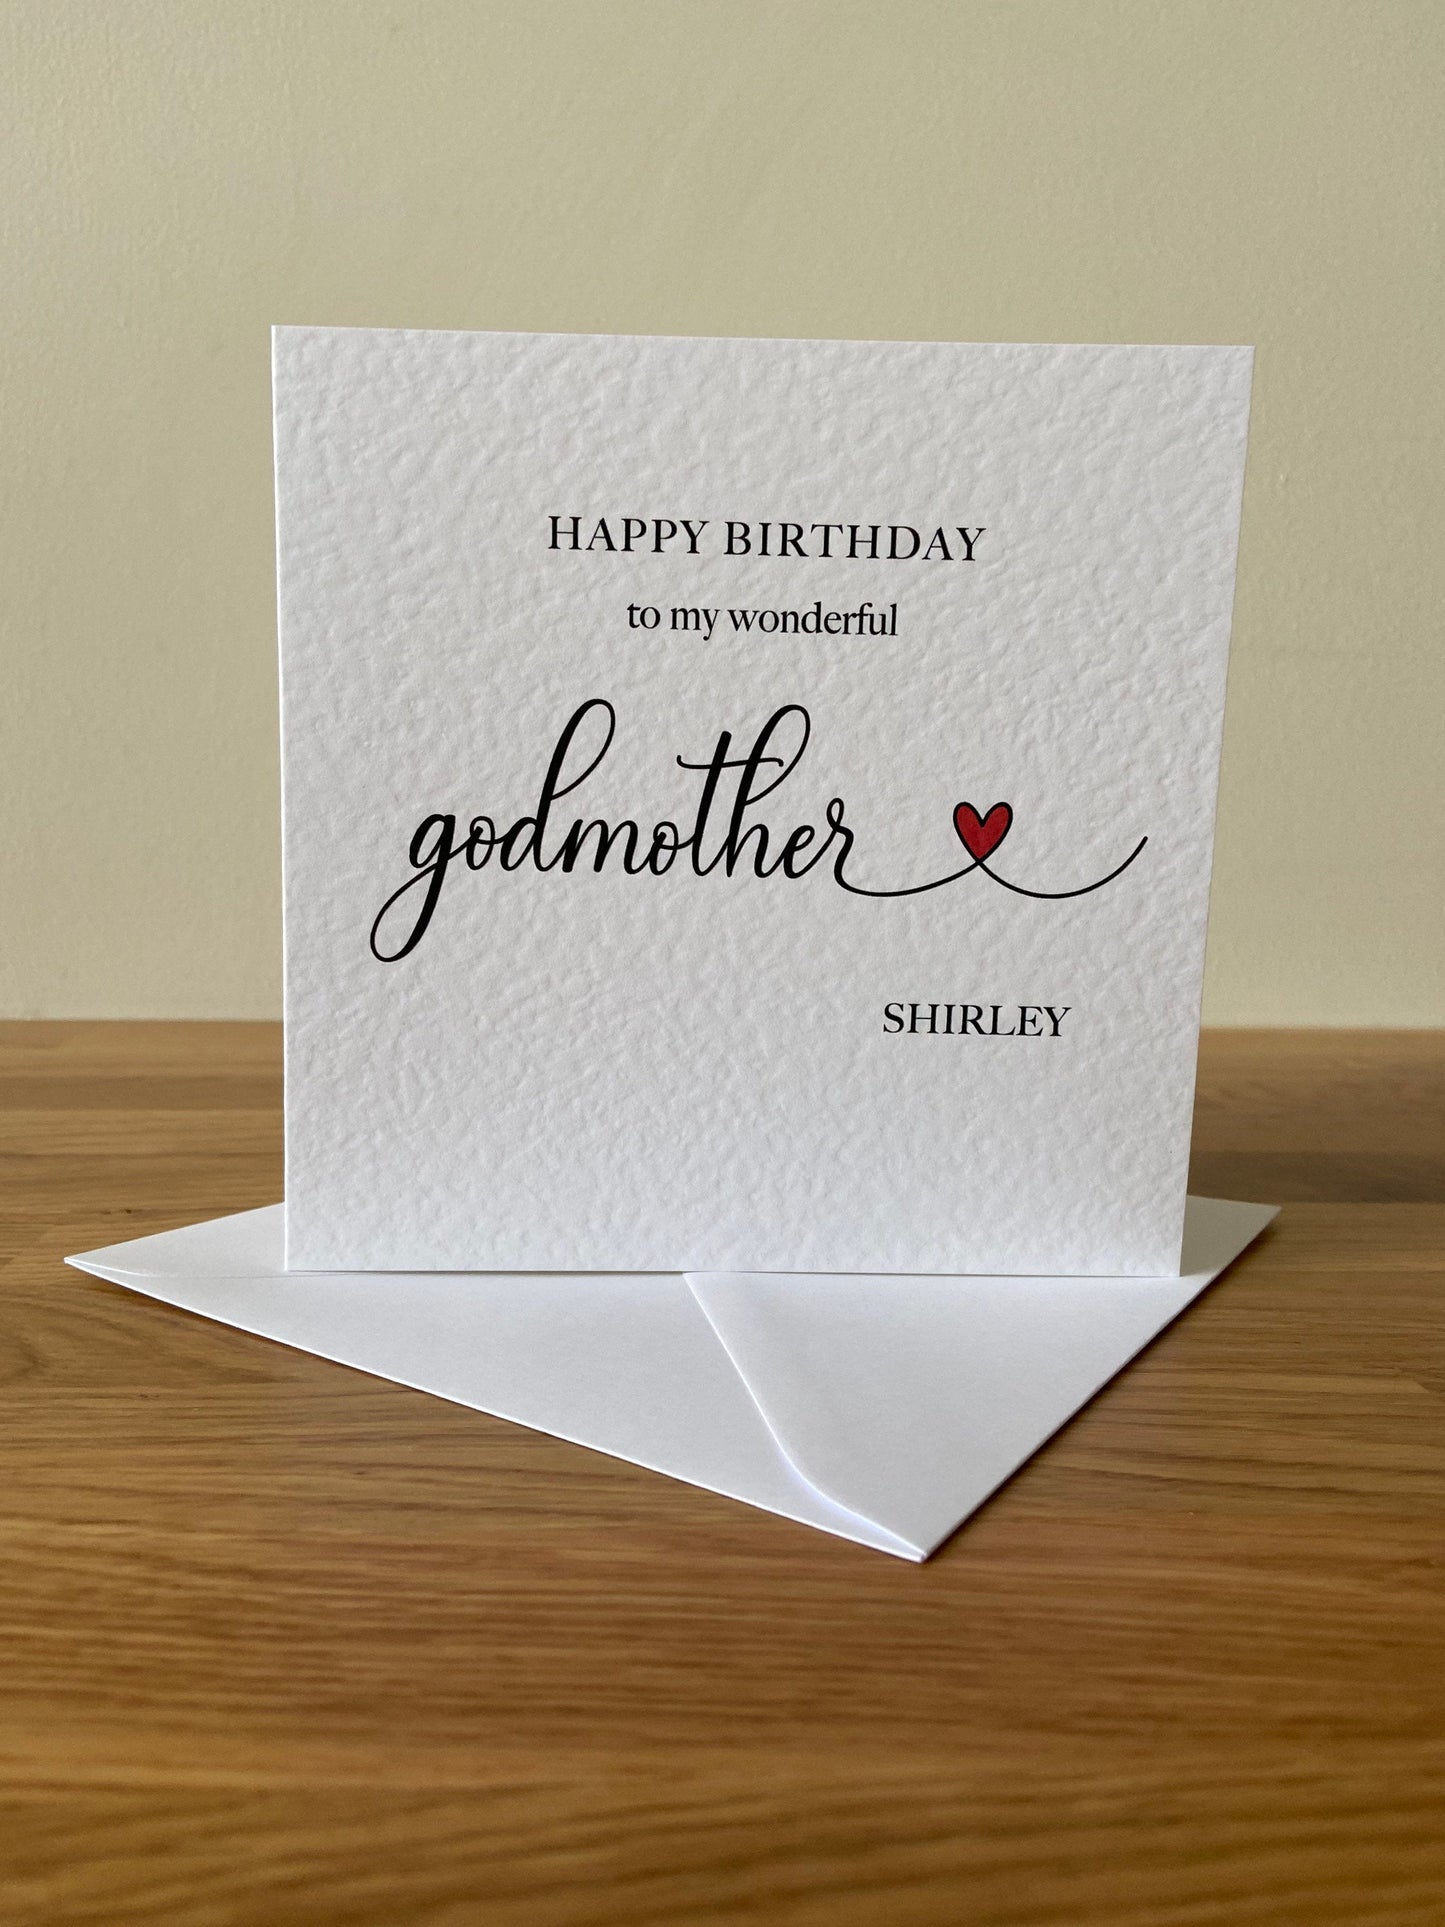 personalised godmother birthday card